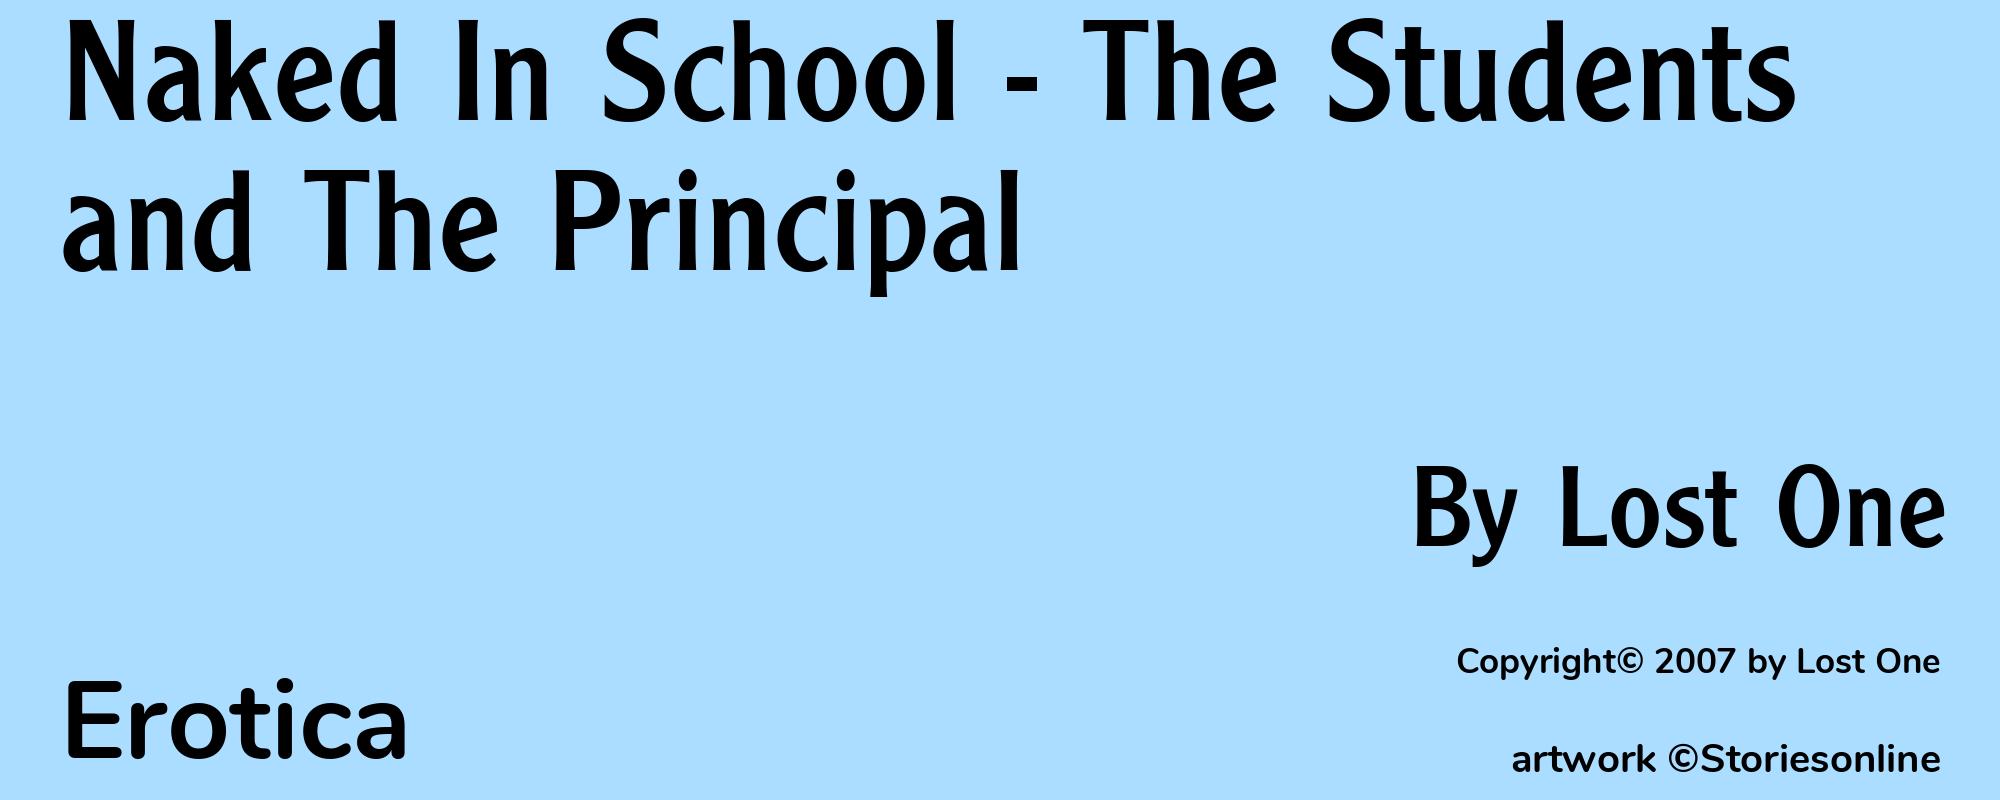 Naked In School - The Students and The Principal - Cover